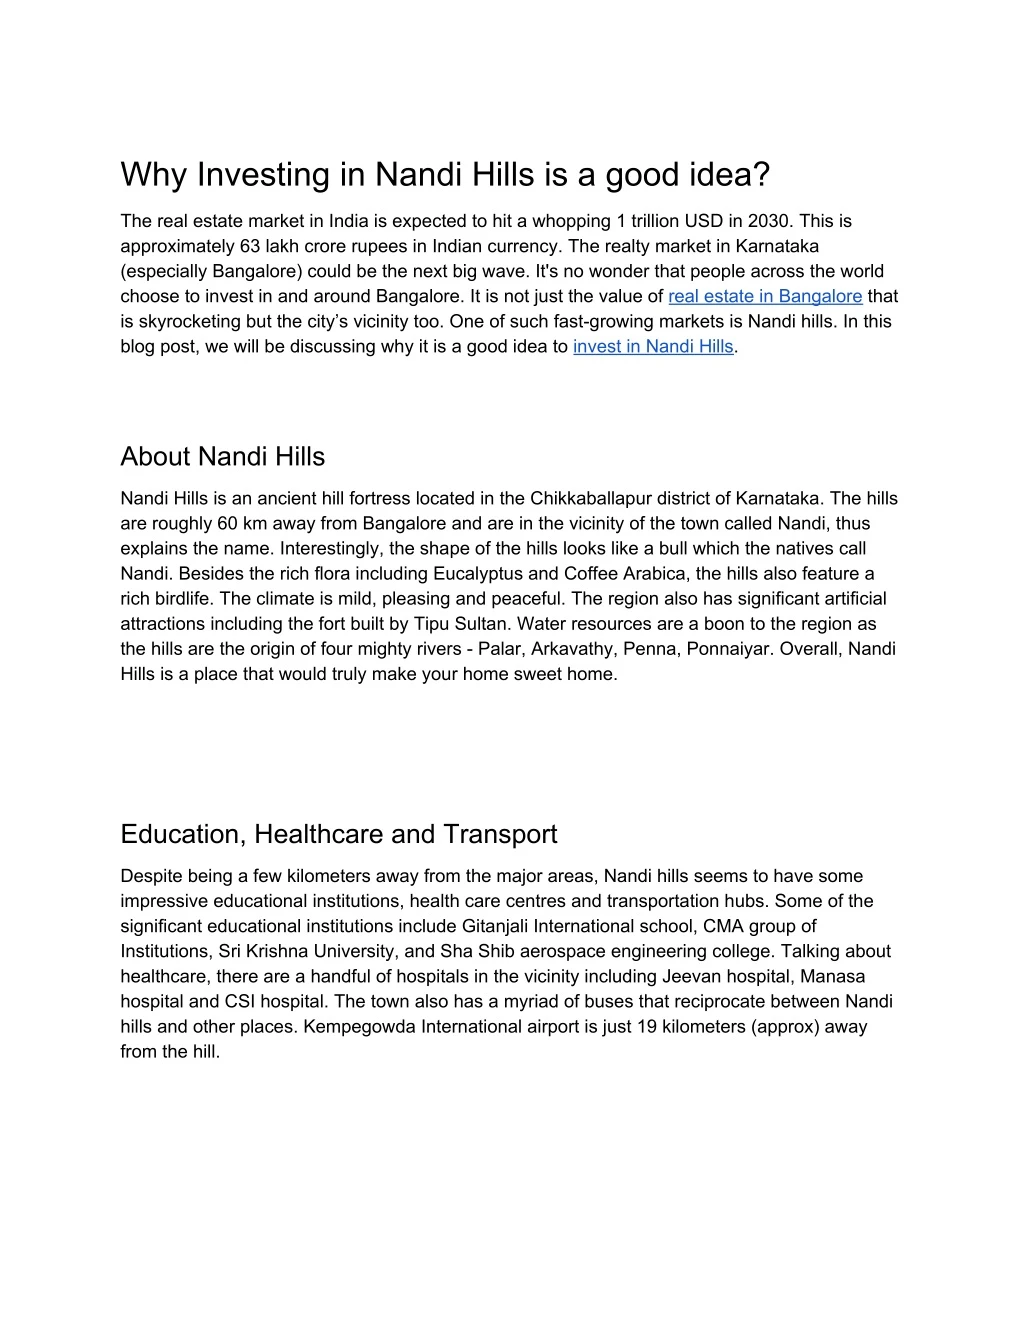 why investing in nandi hills is a good idea